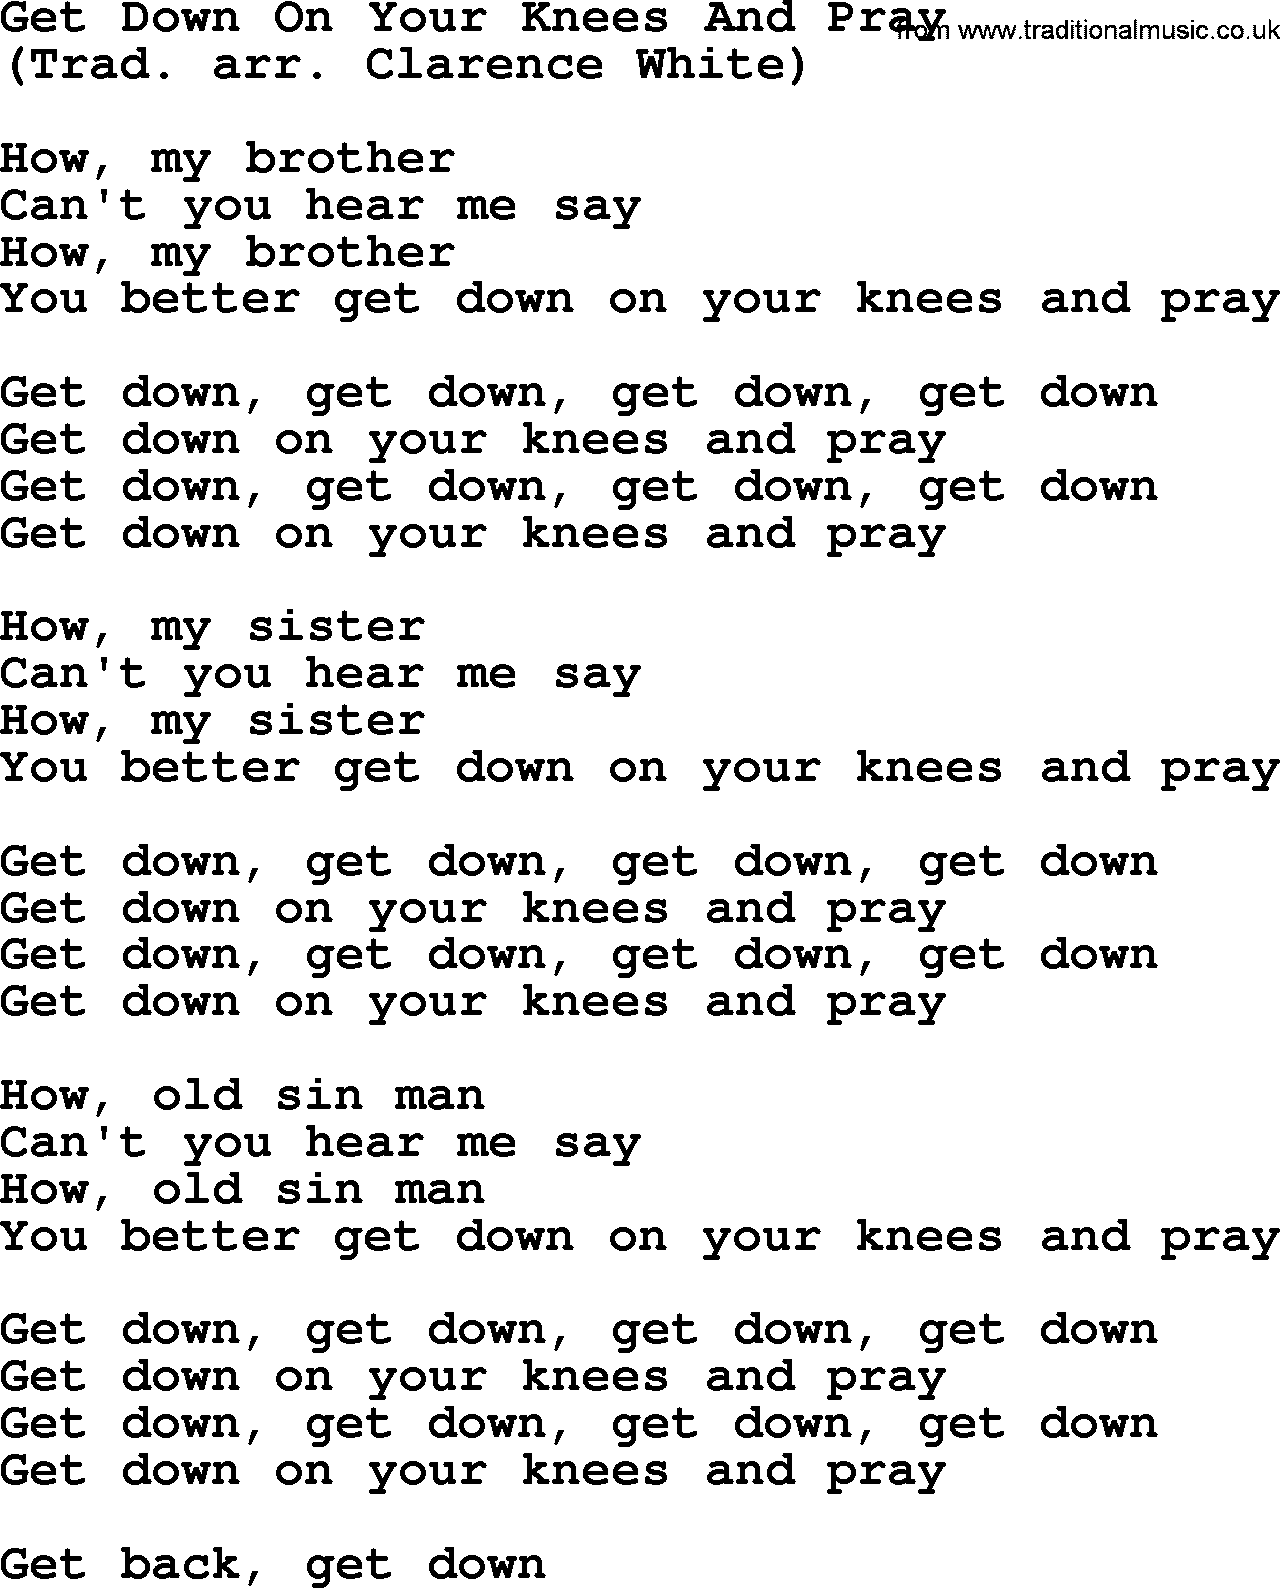 The Byrds song Get Down On Your Knees And Pray, lyrics